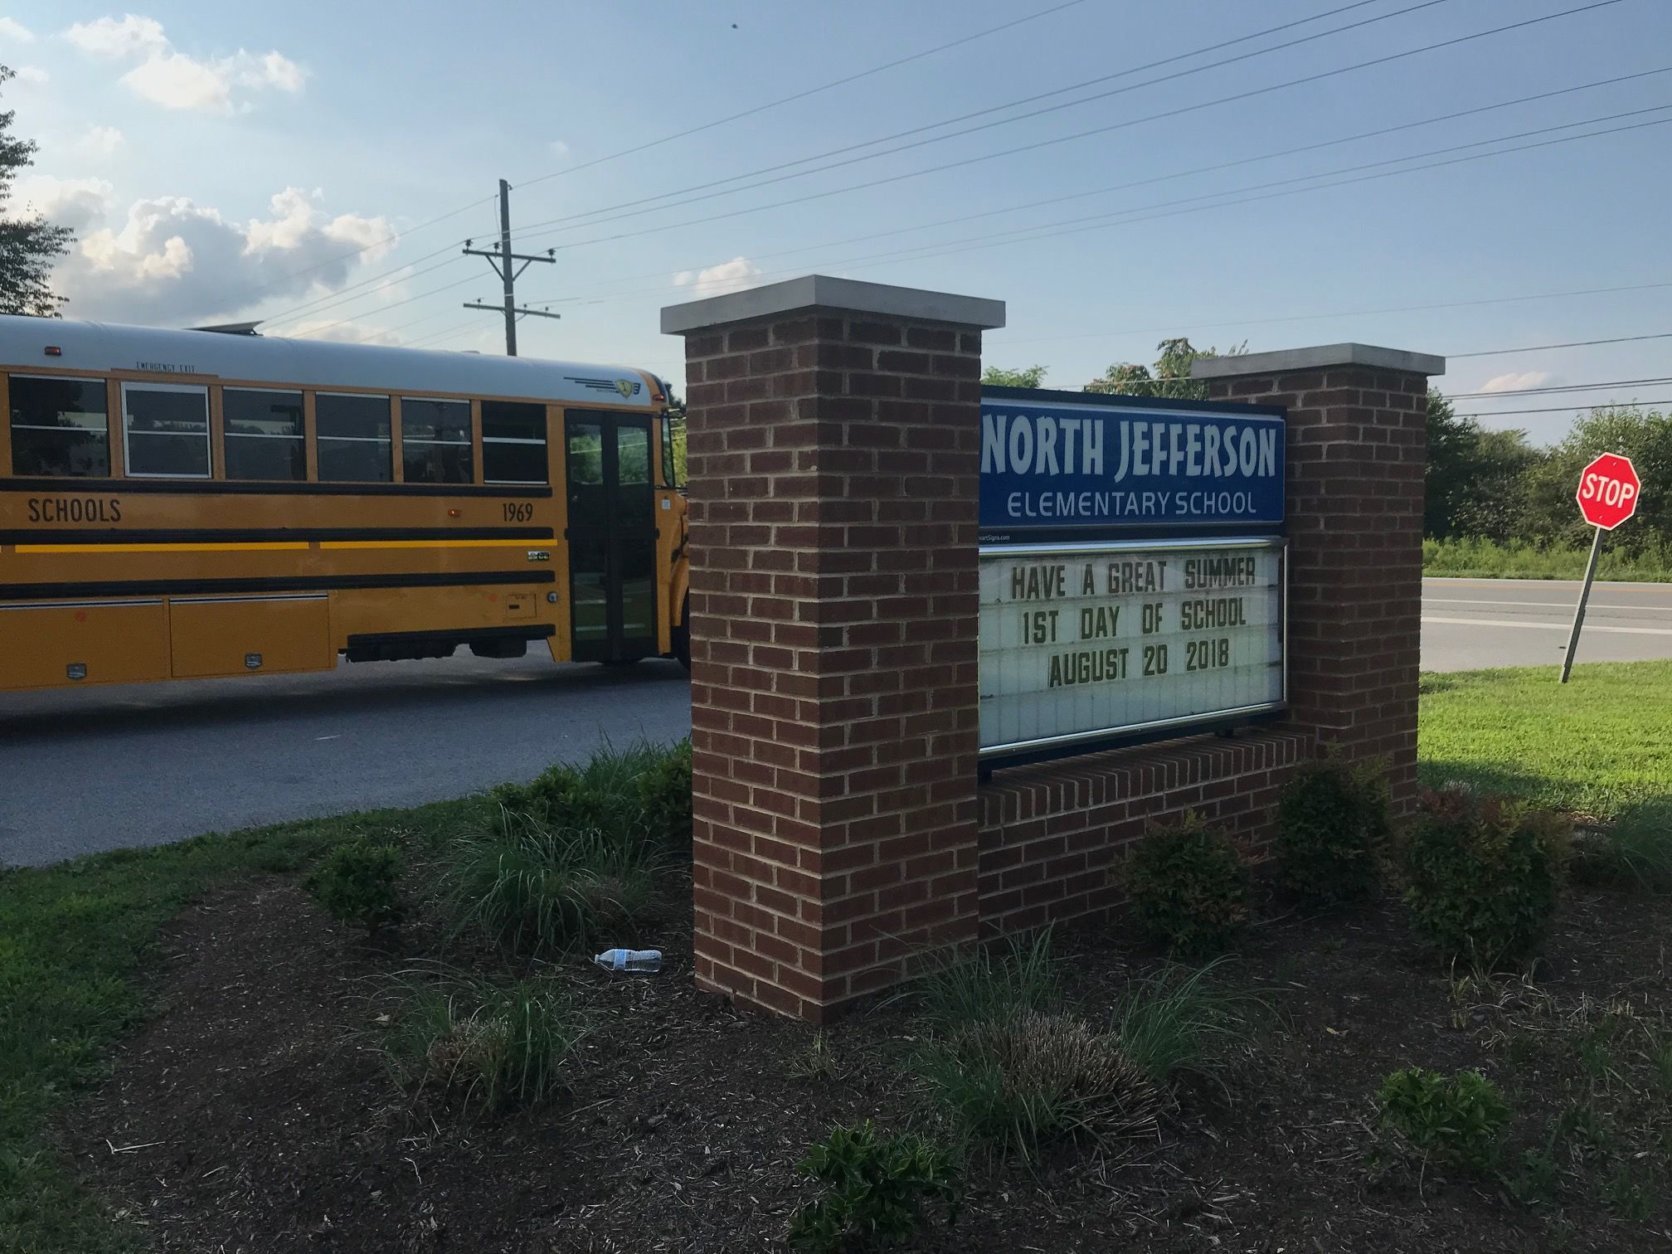  North Jefferson Elementary School is just across Route 9 from the soon-to-be-built rock wall plant. Neighbors say three other schools are within a mile of the manufacturing facility. (WTOP/Neal Augenstein)